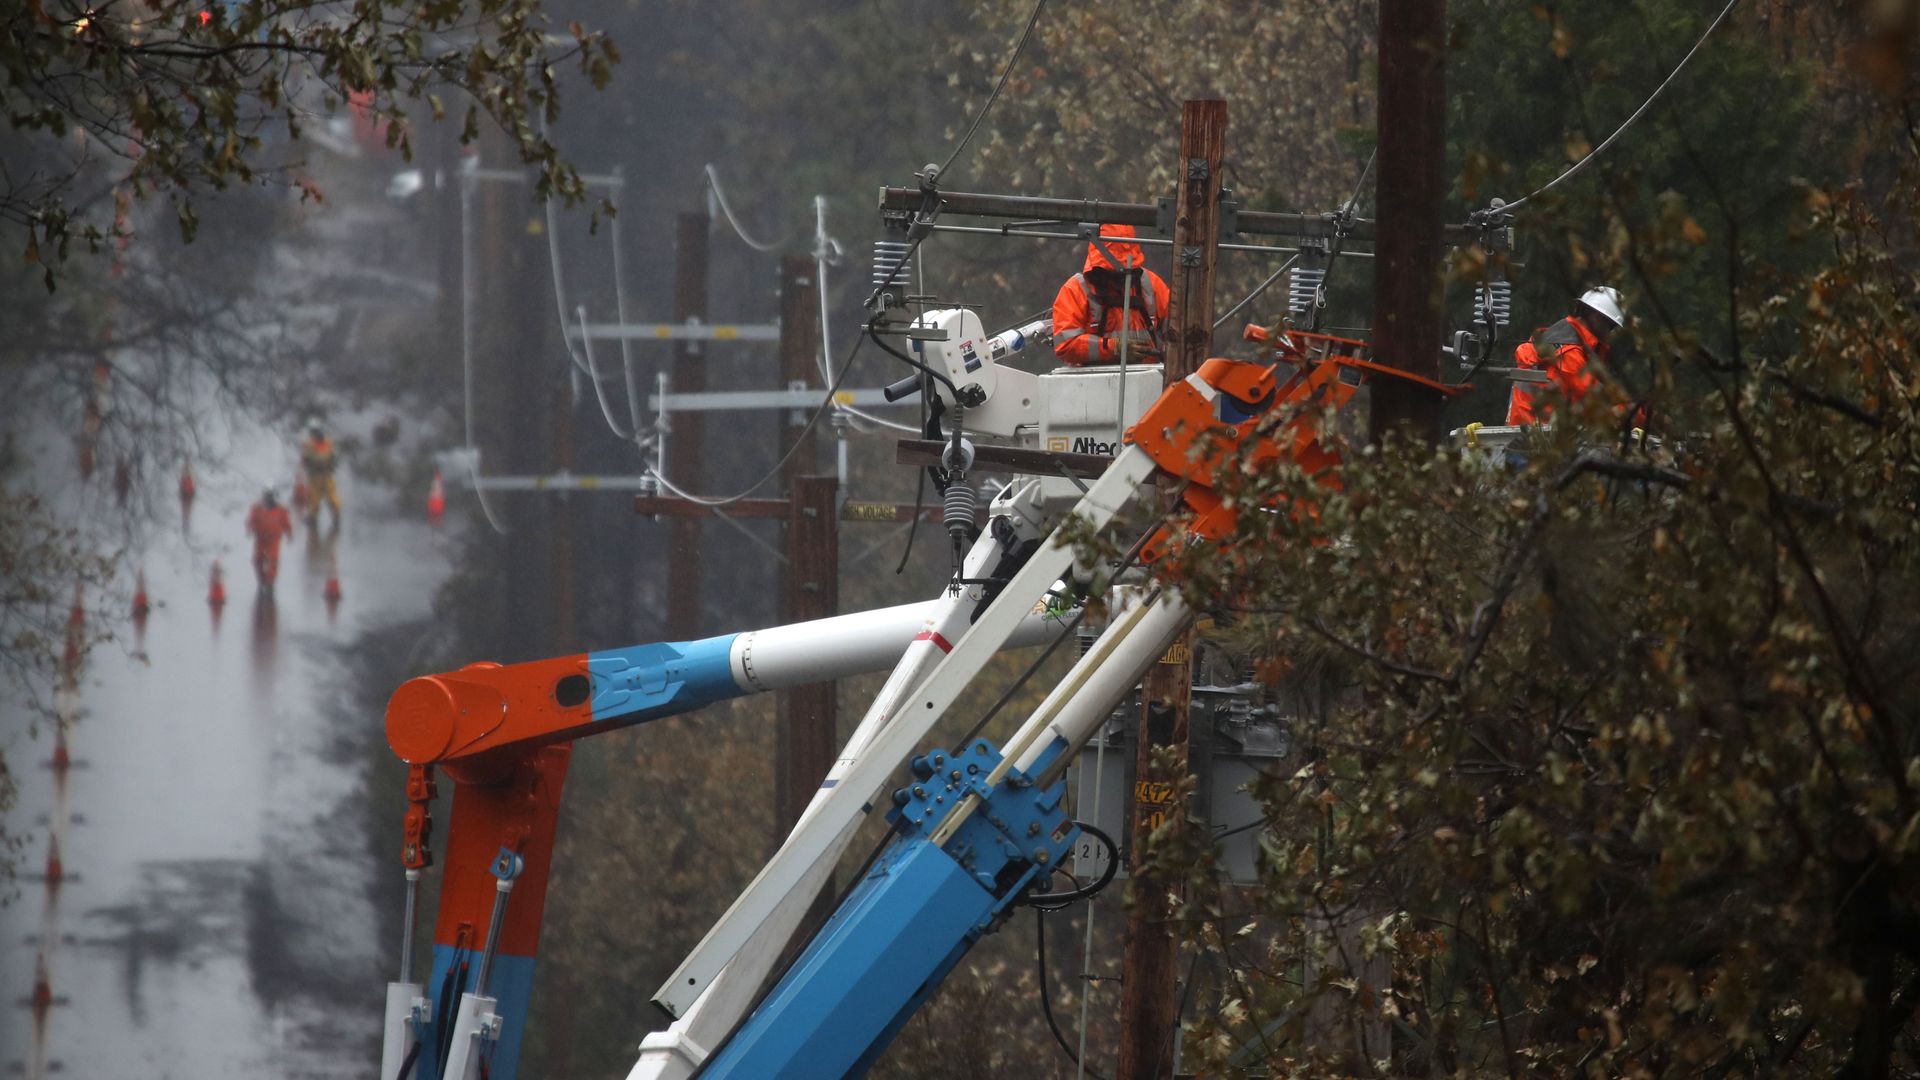 Pacific Gas and Electric (PG&E) crews repair power lines that were destroyed by the Camp Fire on November 21, 2018 in Paradise, California.